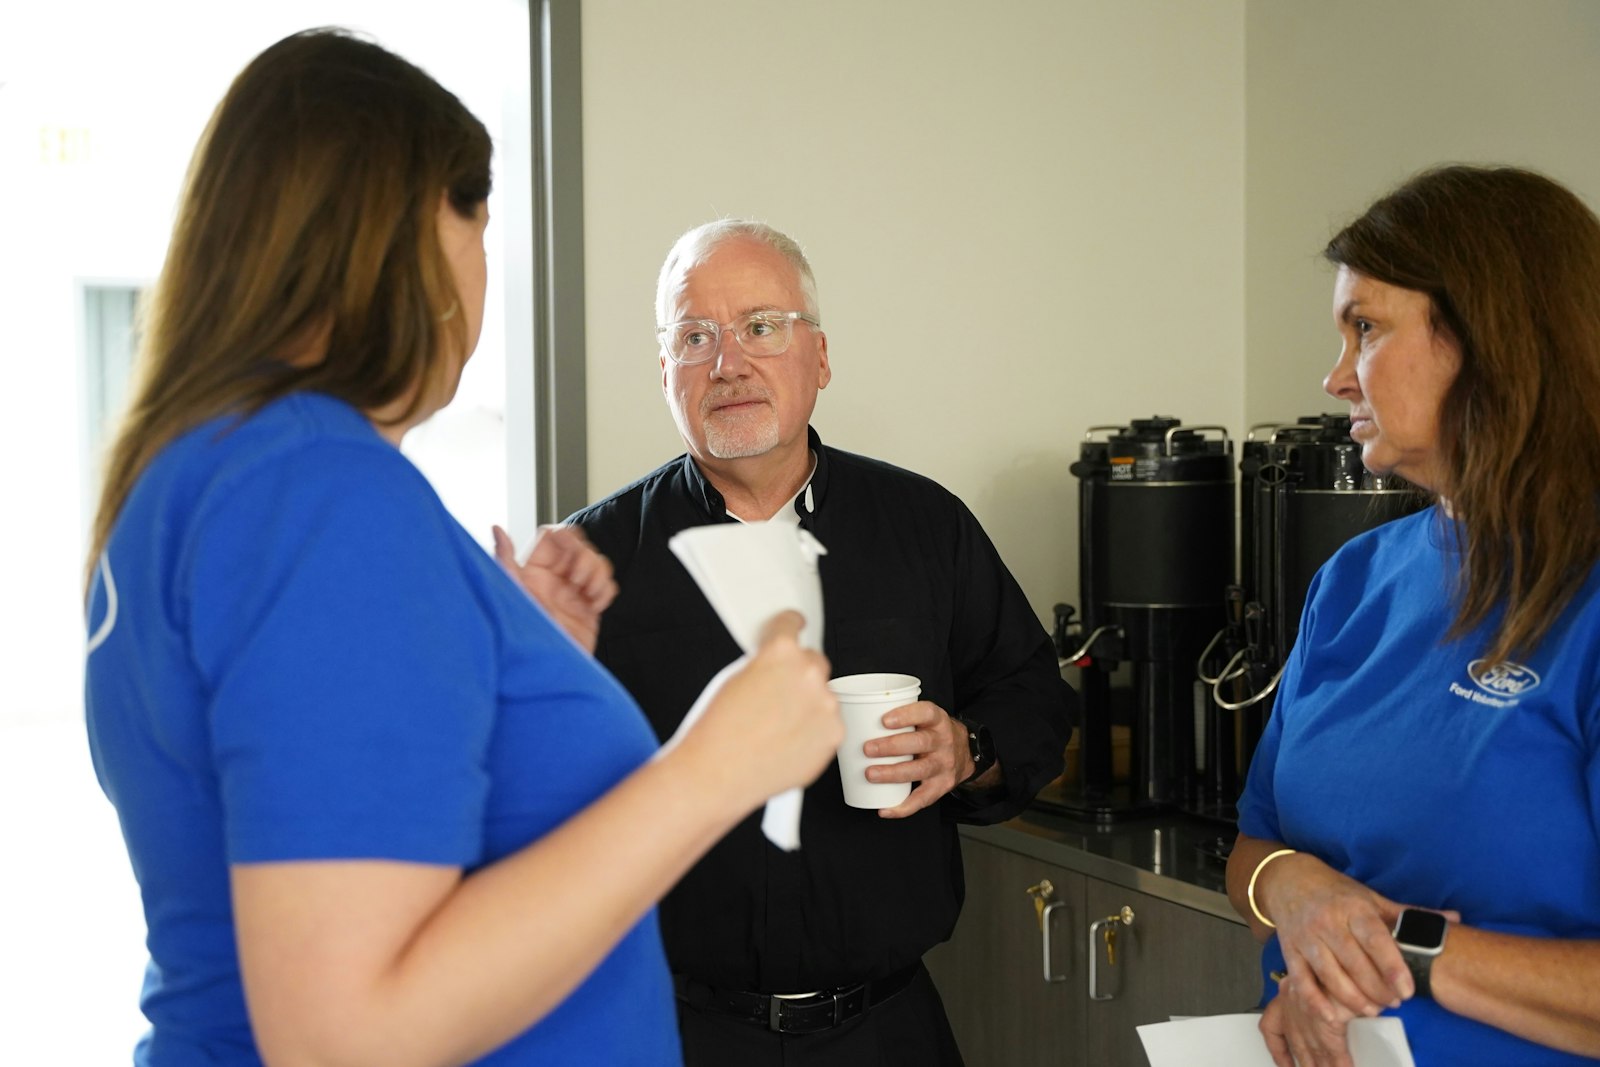 Fr. McCabe speaks with members of Ford Land at the Pope Francis Center's new bridge housing facility. Fr. McCabe went around the country, learning best practices for homeless ministry in order to apply those principles to the bridge housing facility.